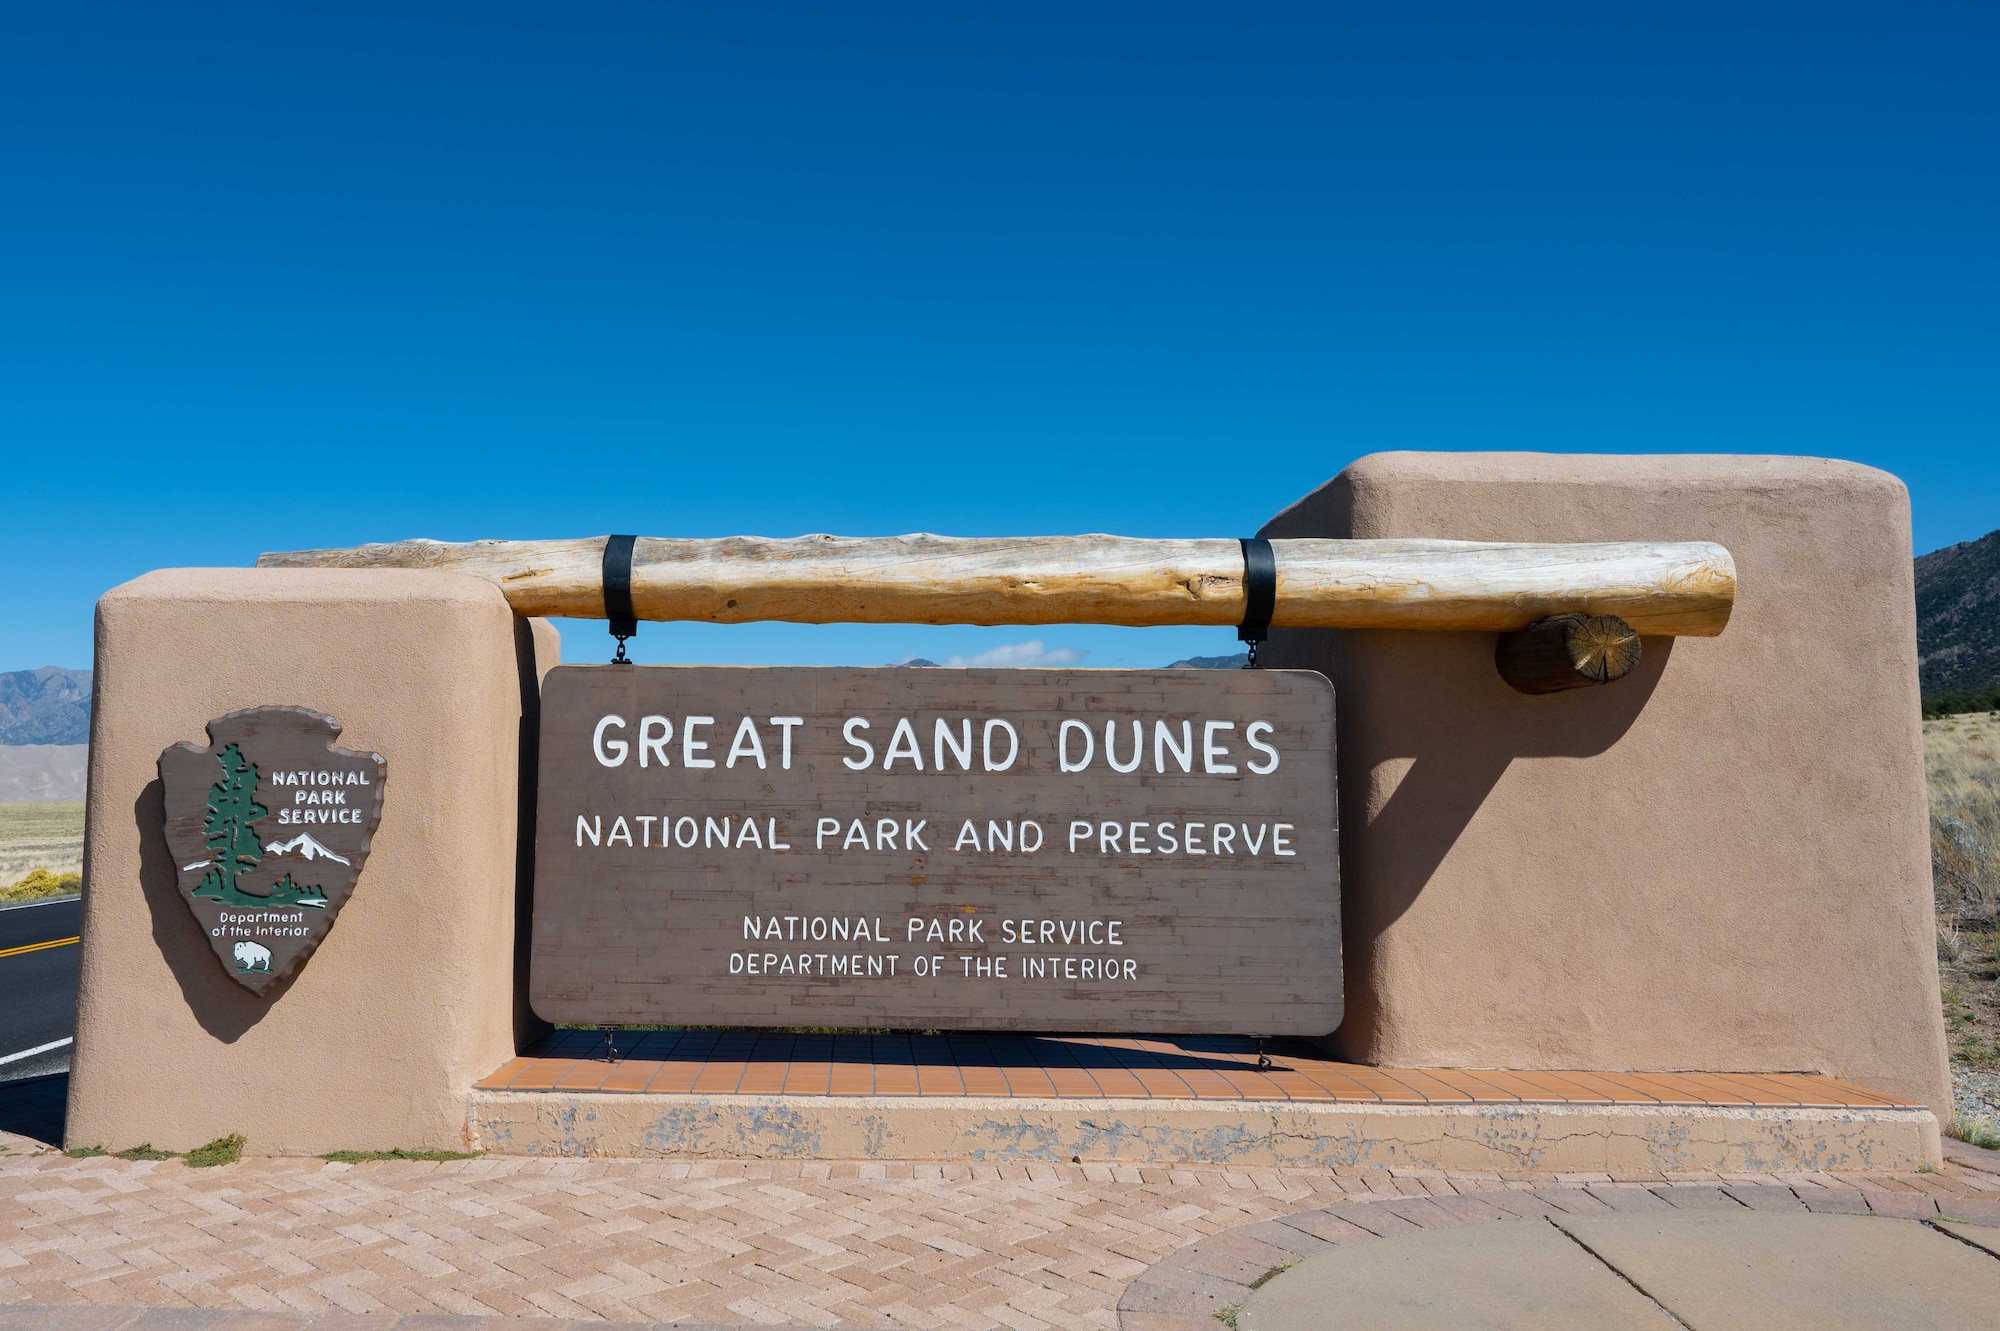 The welcome sign of Great Sand Dunes National Park and Preserve.